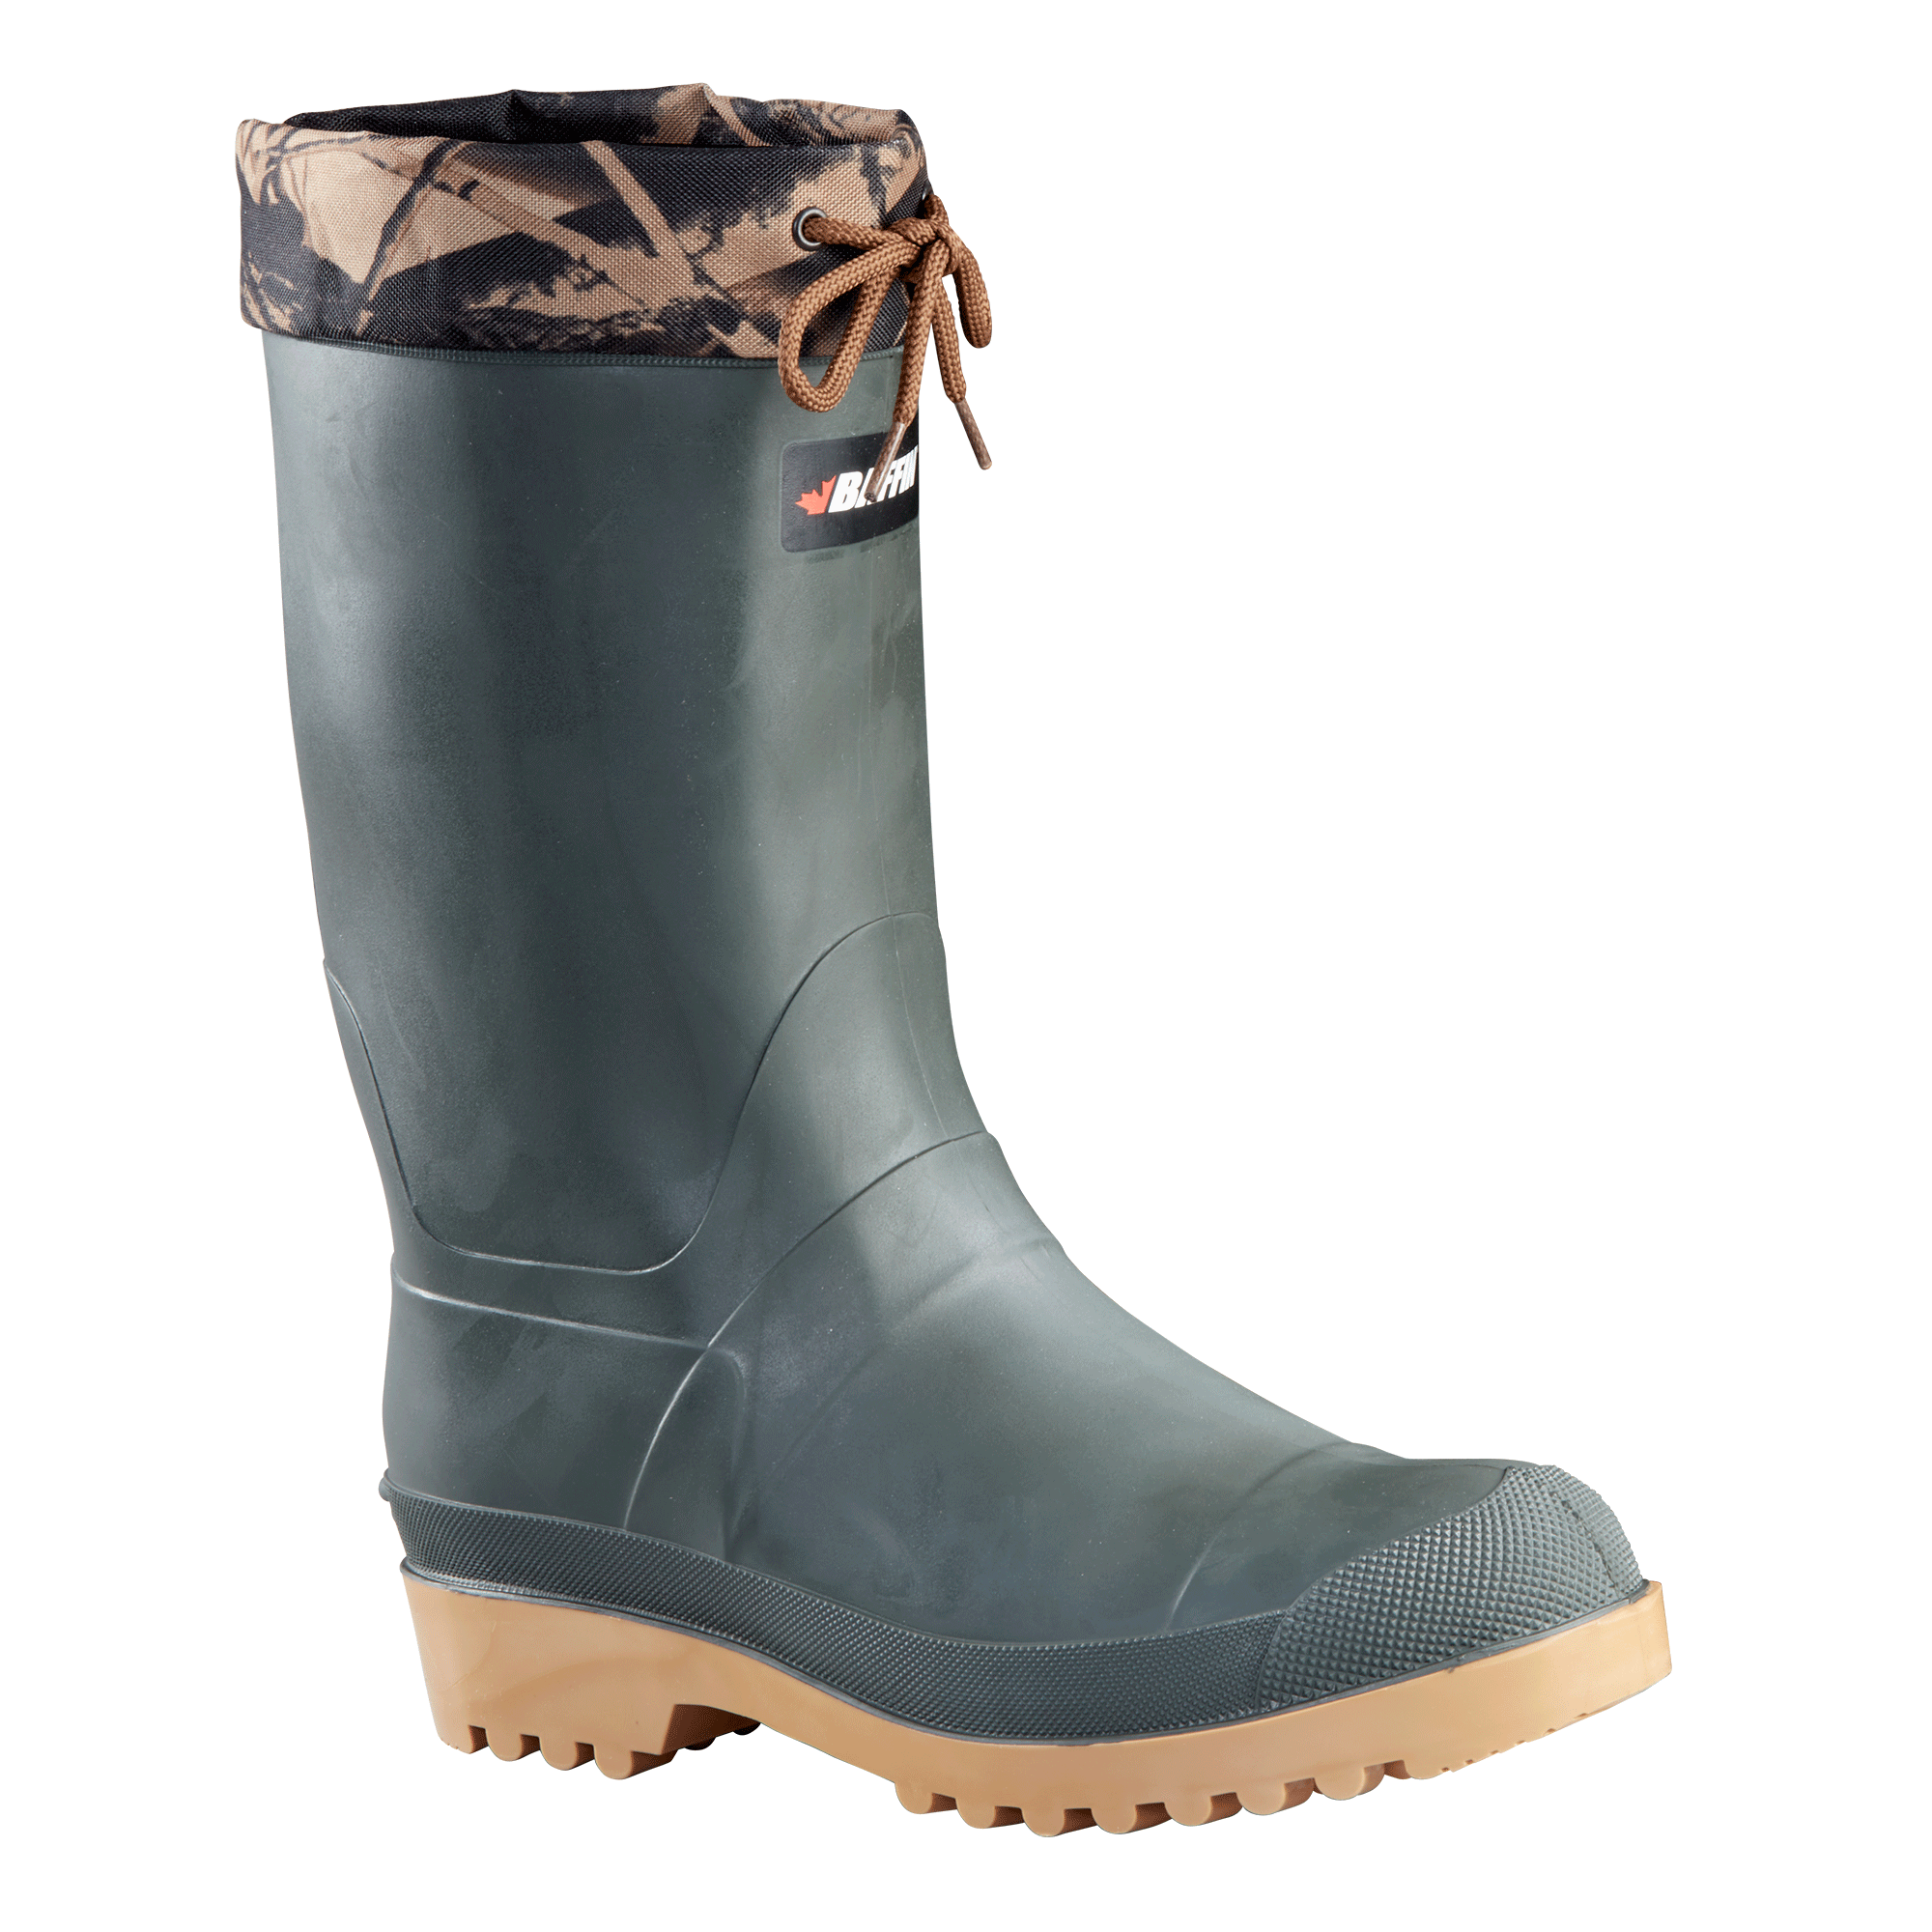 Baffin Trapper Men&s Rubber Boots Forest/Brown 10